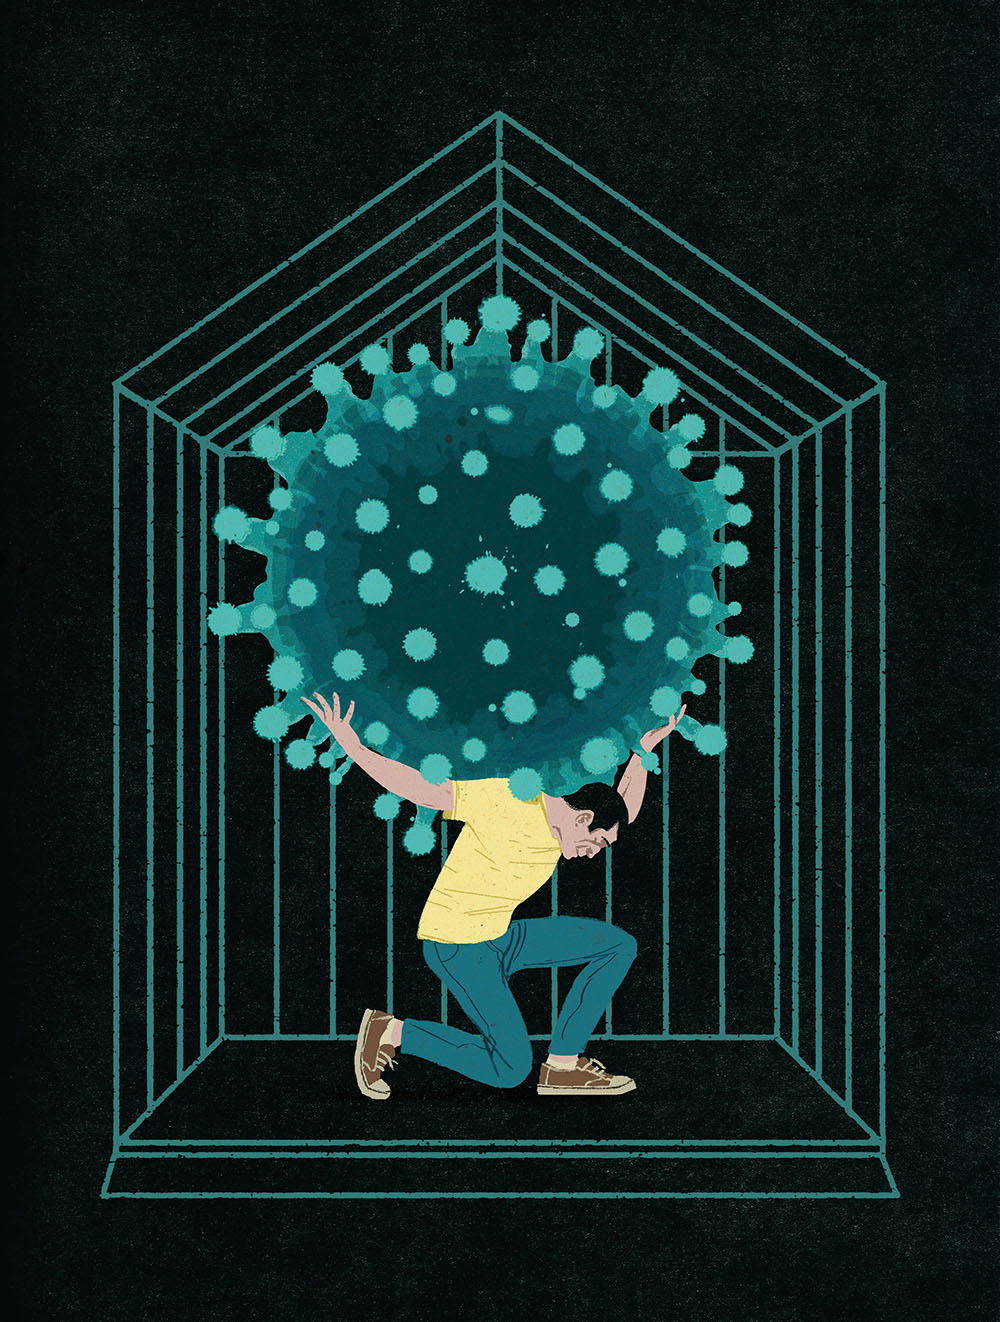 An illustration of a man holding a large COVID-19 molecule.